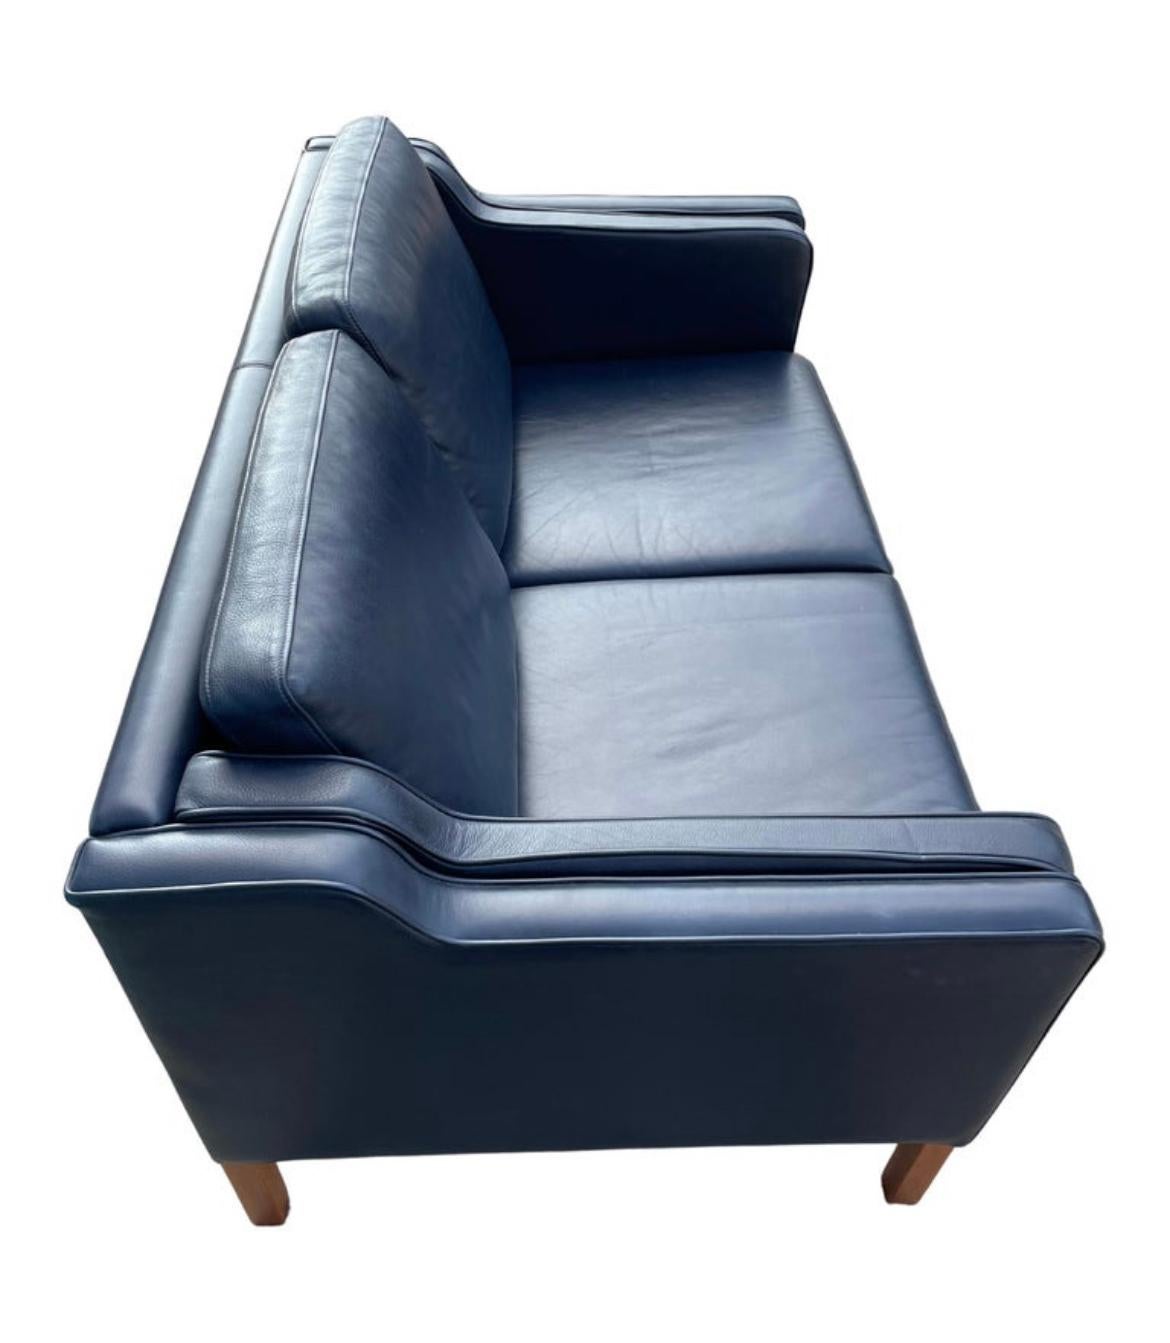 Midcentury Danish modern beautiful dark navy blue leather 2 seat sofa birch legs. Style of Børge Mogensen. Beautiful Navy Blue leather is soft and shows little to no signs of use but broken in nicely. Great small Danish Modern sofa. Great condition.